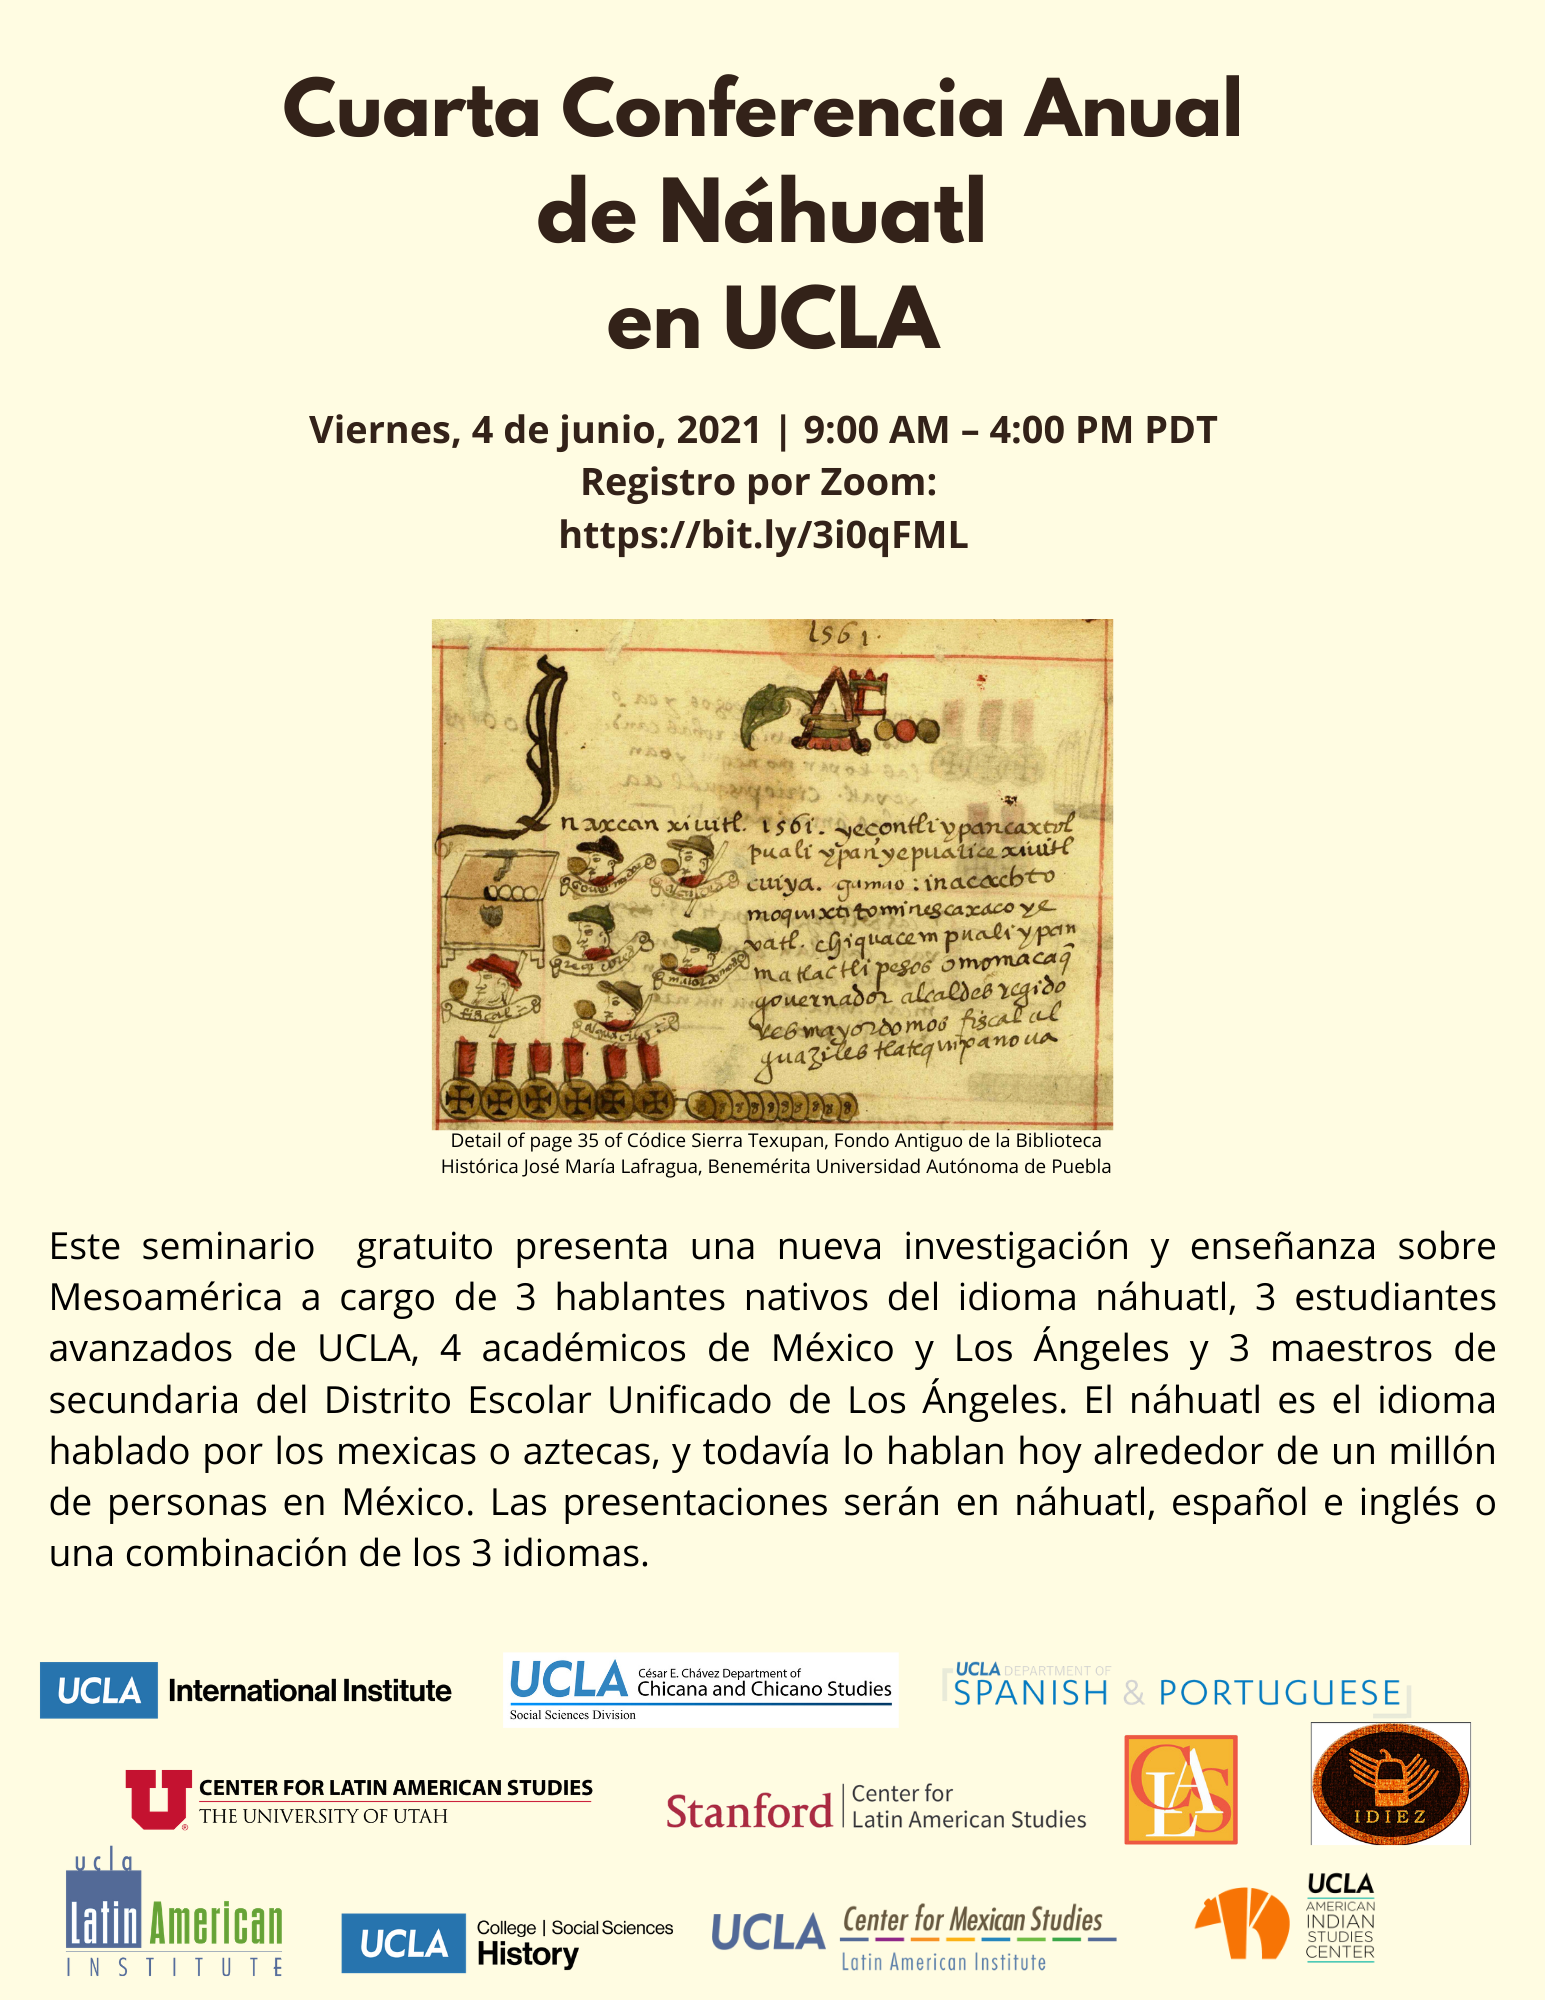 UCLA American Indian Studies Center: News and Events